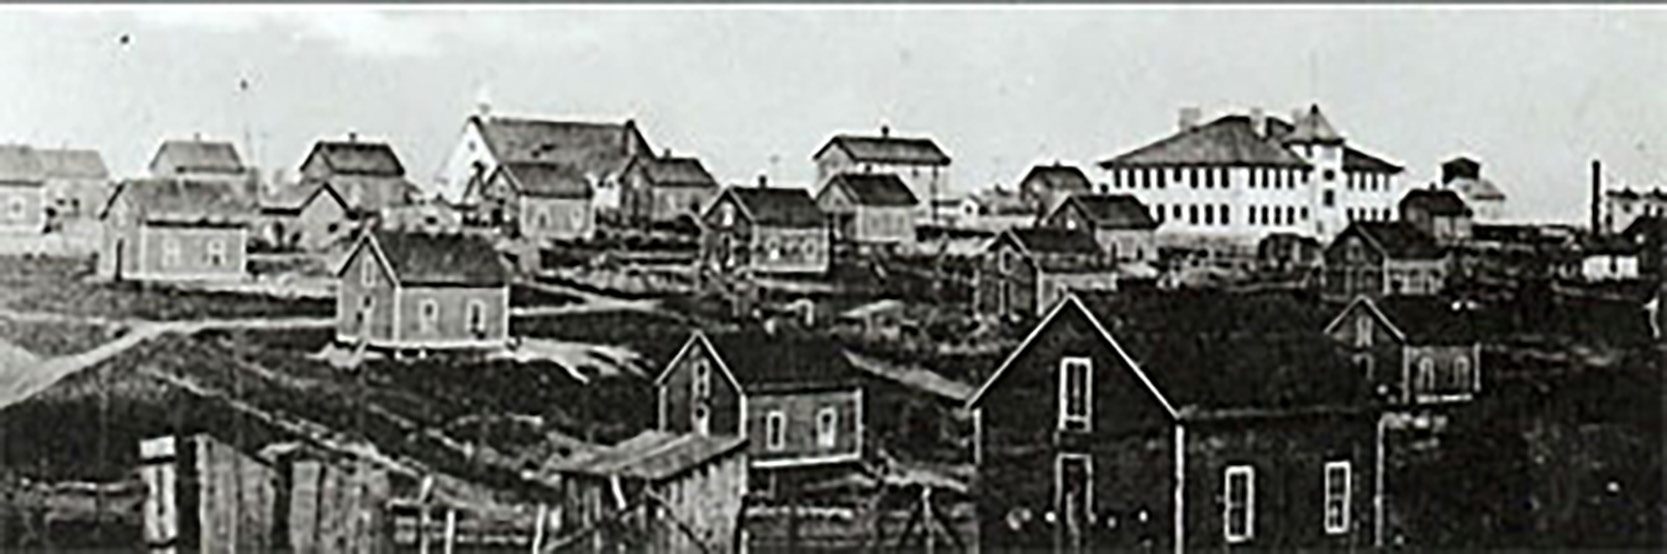 Buxton, Iowa, as it was at the turn of the 19th and 20th Centuries. Public-domain image from [Blackpast.org.](http://blackpast.org) 